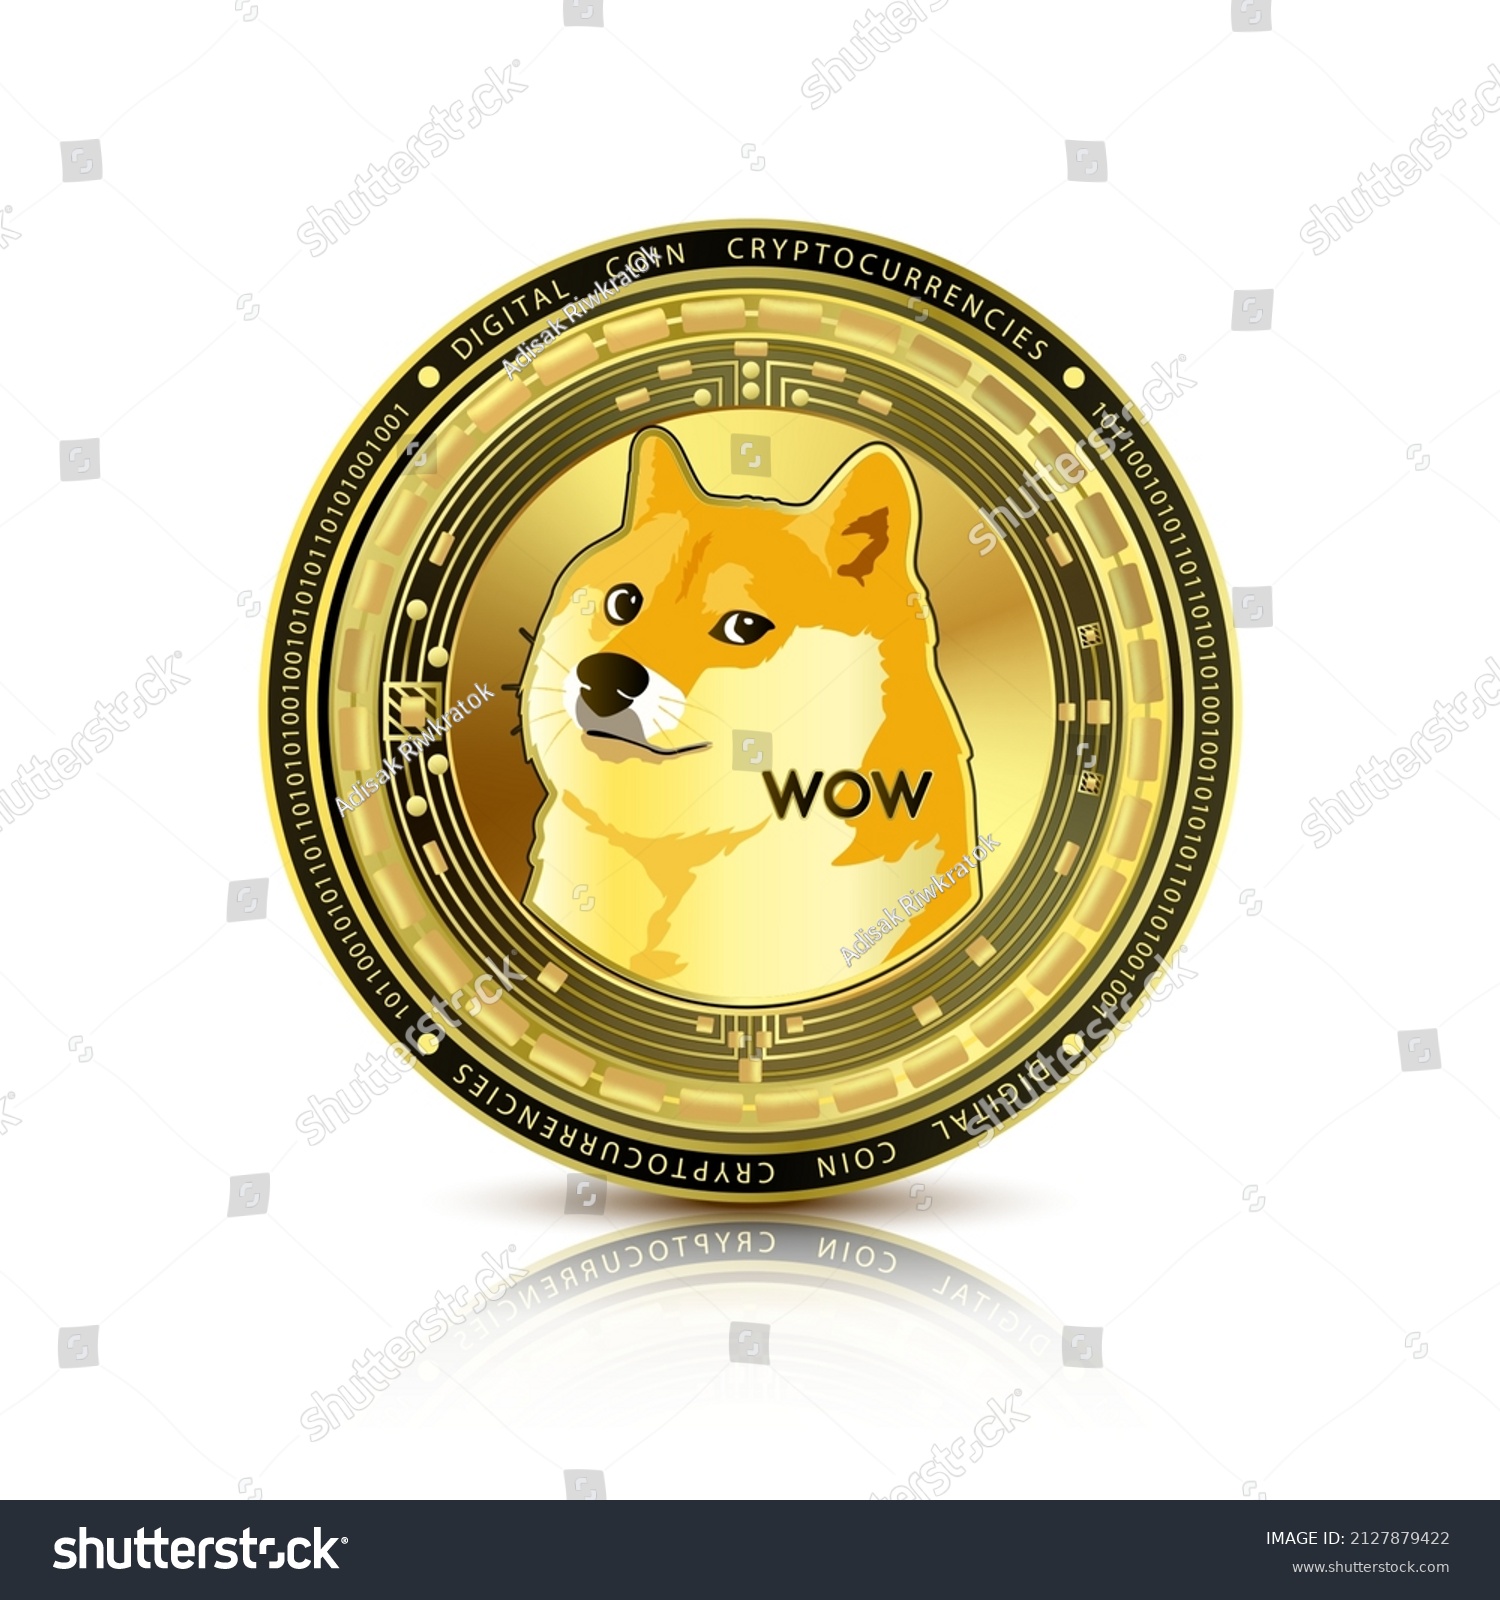 SVG of Golden Dogecoin currency coin. Electronic crypto currency technology. Digital cryptocurrency block chain market token. Realistic 3D vector. Isolated on white background. svg